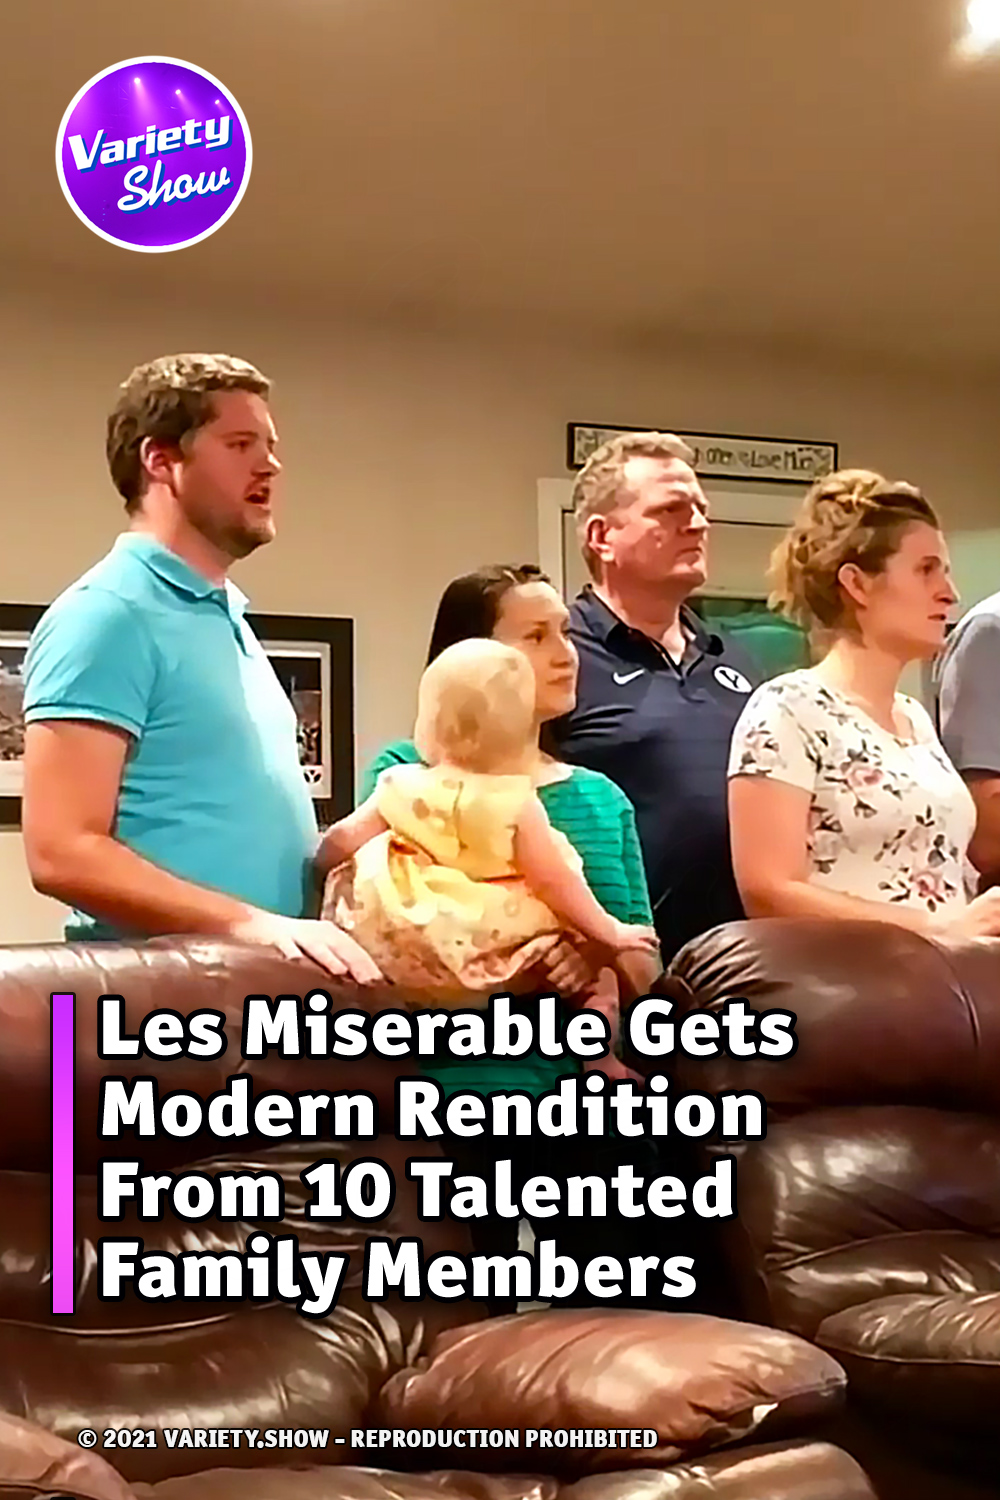 Les Miserable Gets Modern Rendition From 10 Talented Family Members